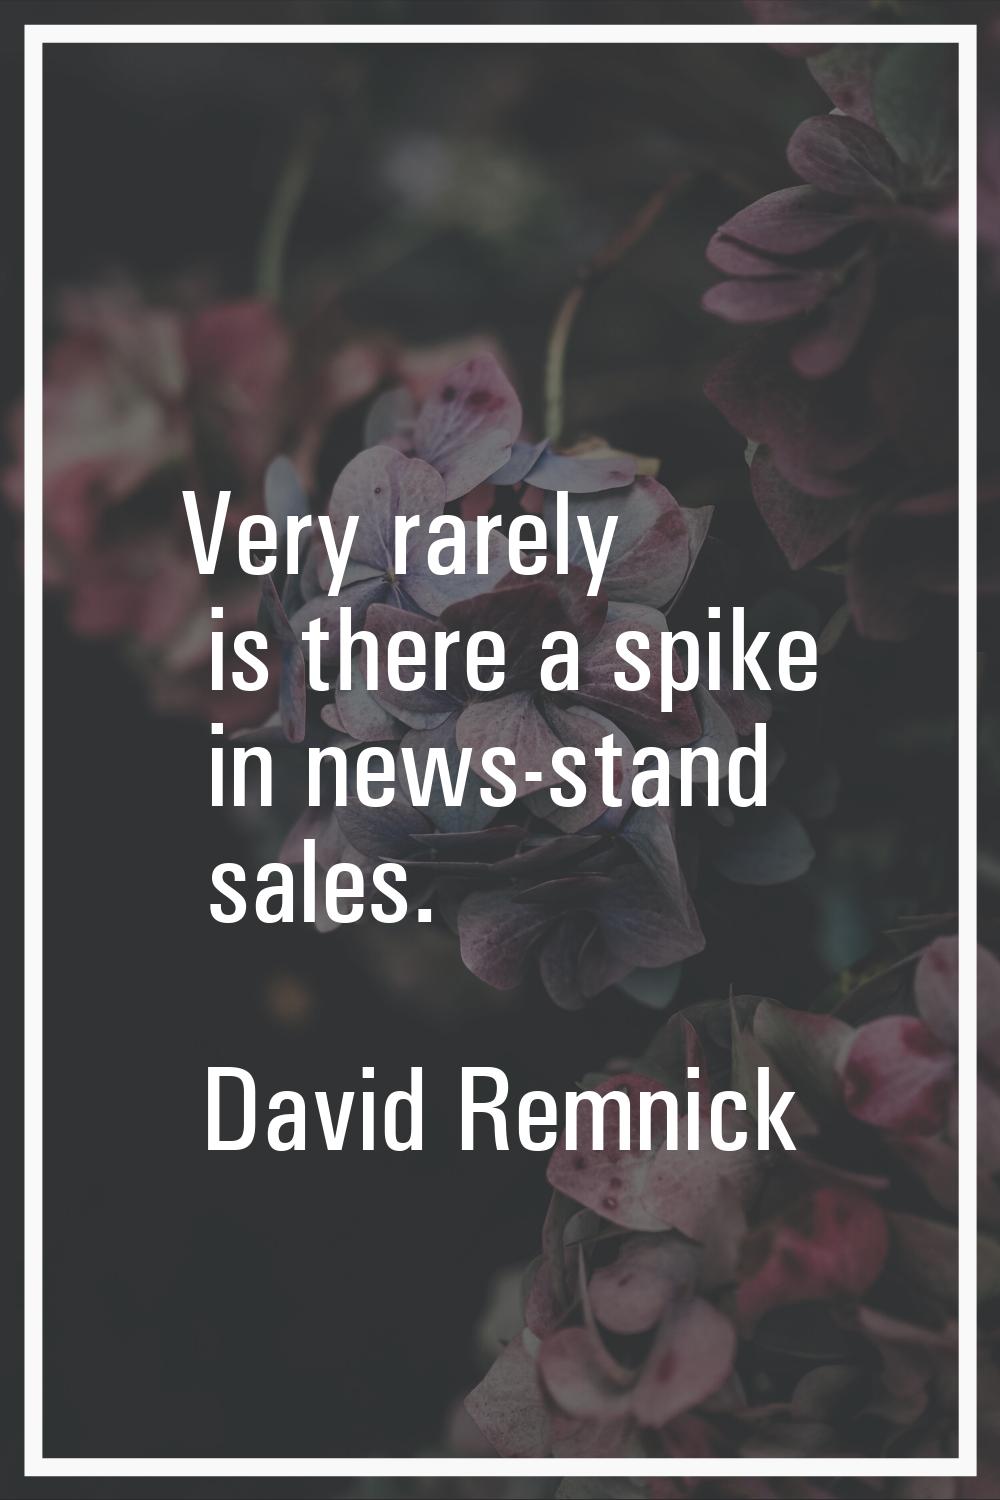 Very rarely is there a spike in news-stand sales.